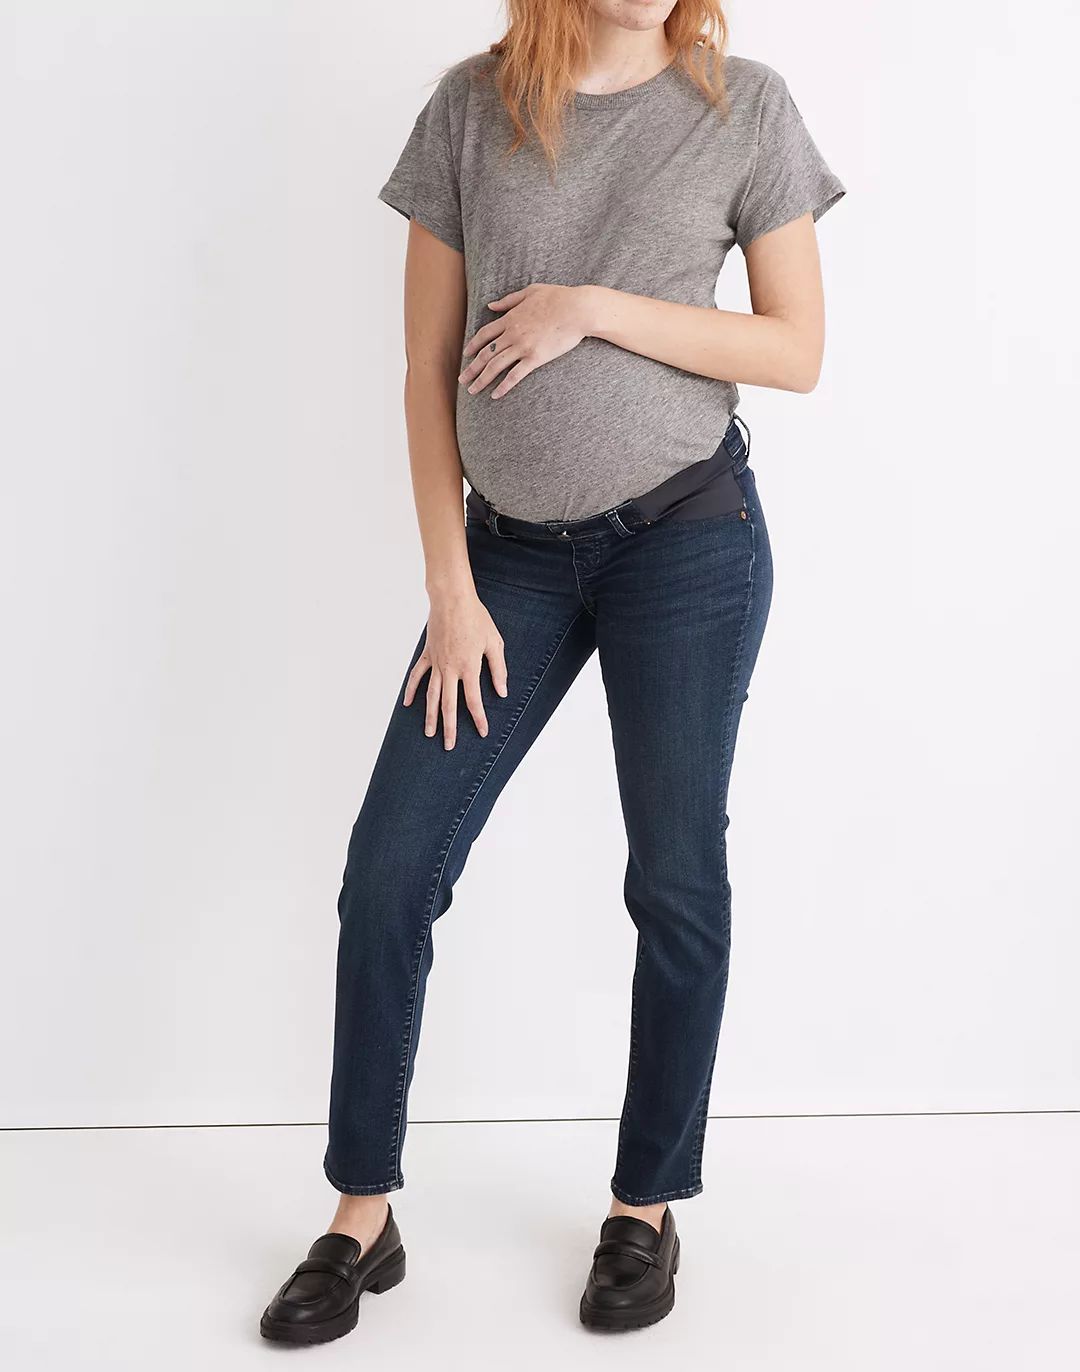 Maternity Side-Panel Stovepipe Jeans in Dahill Wash | Madewell